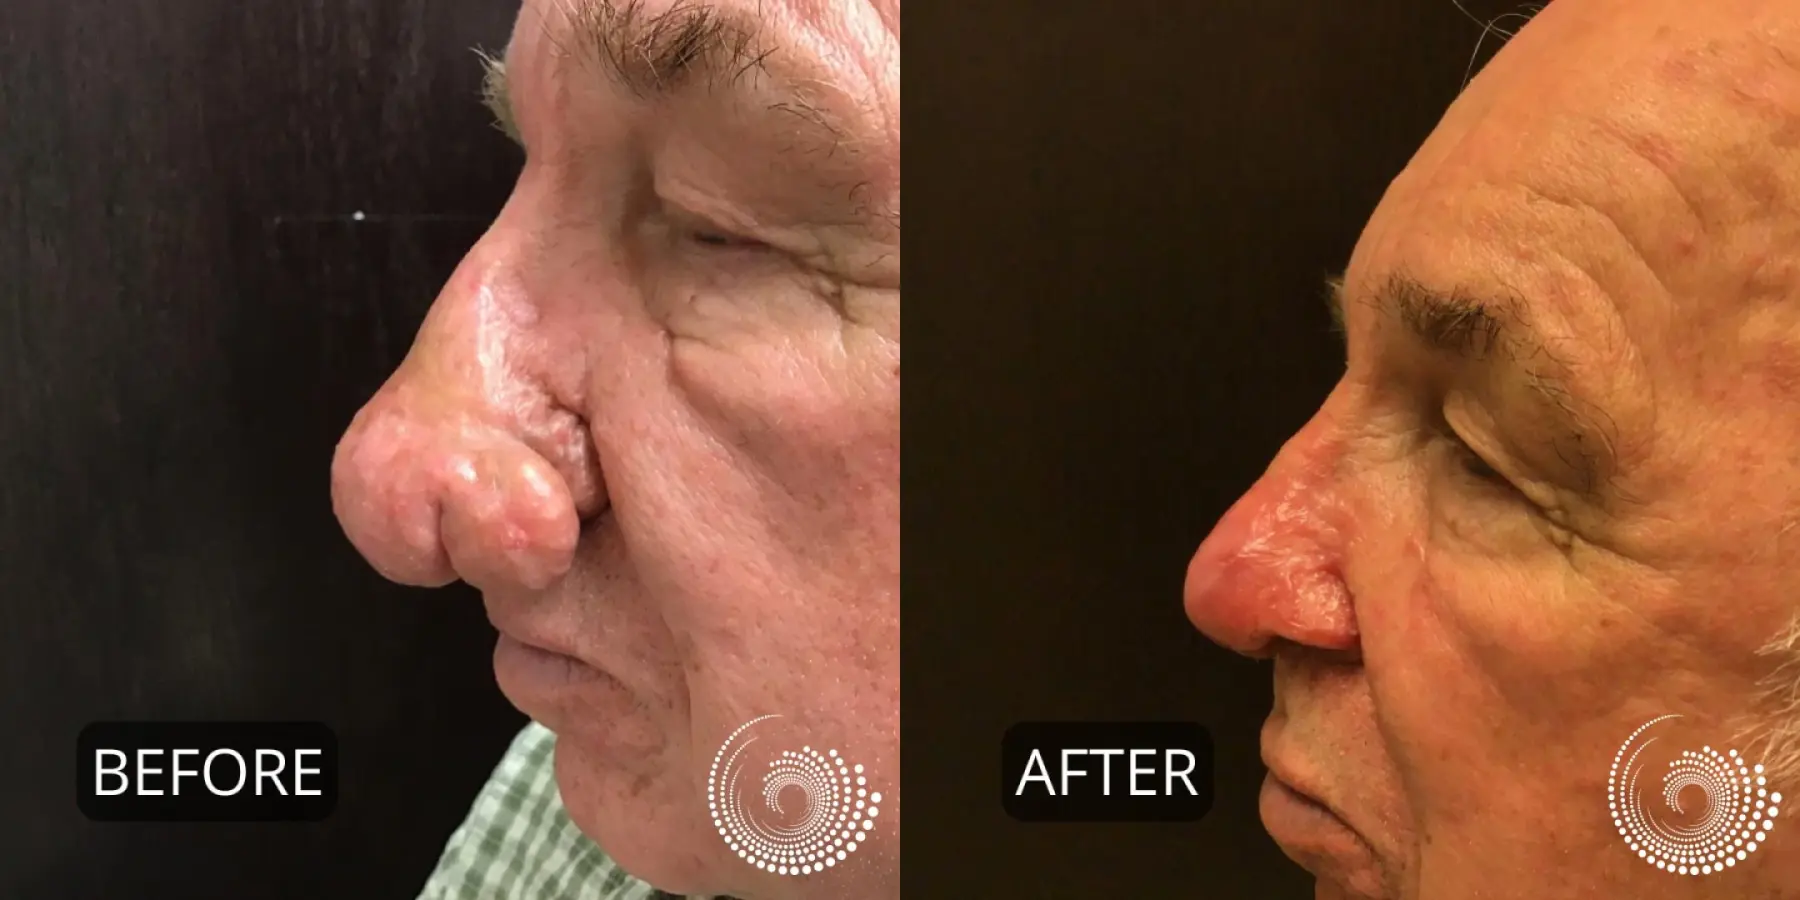 Rhinophyma treatment to reshape nose - Before and After 1